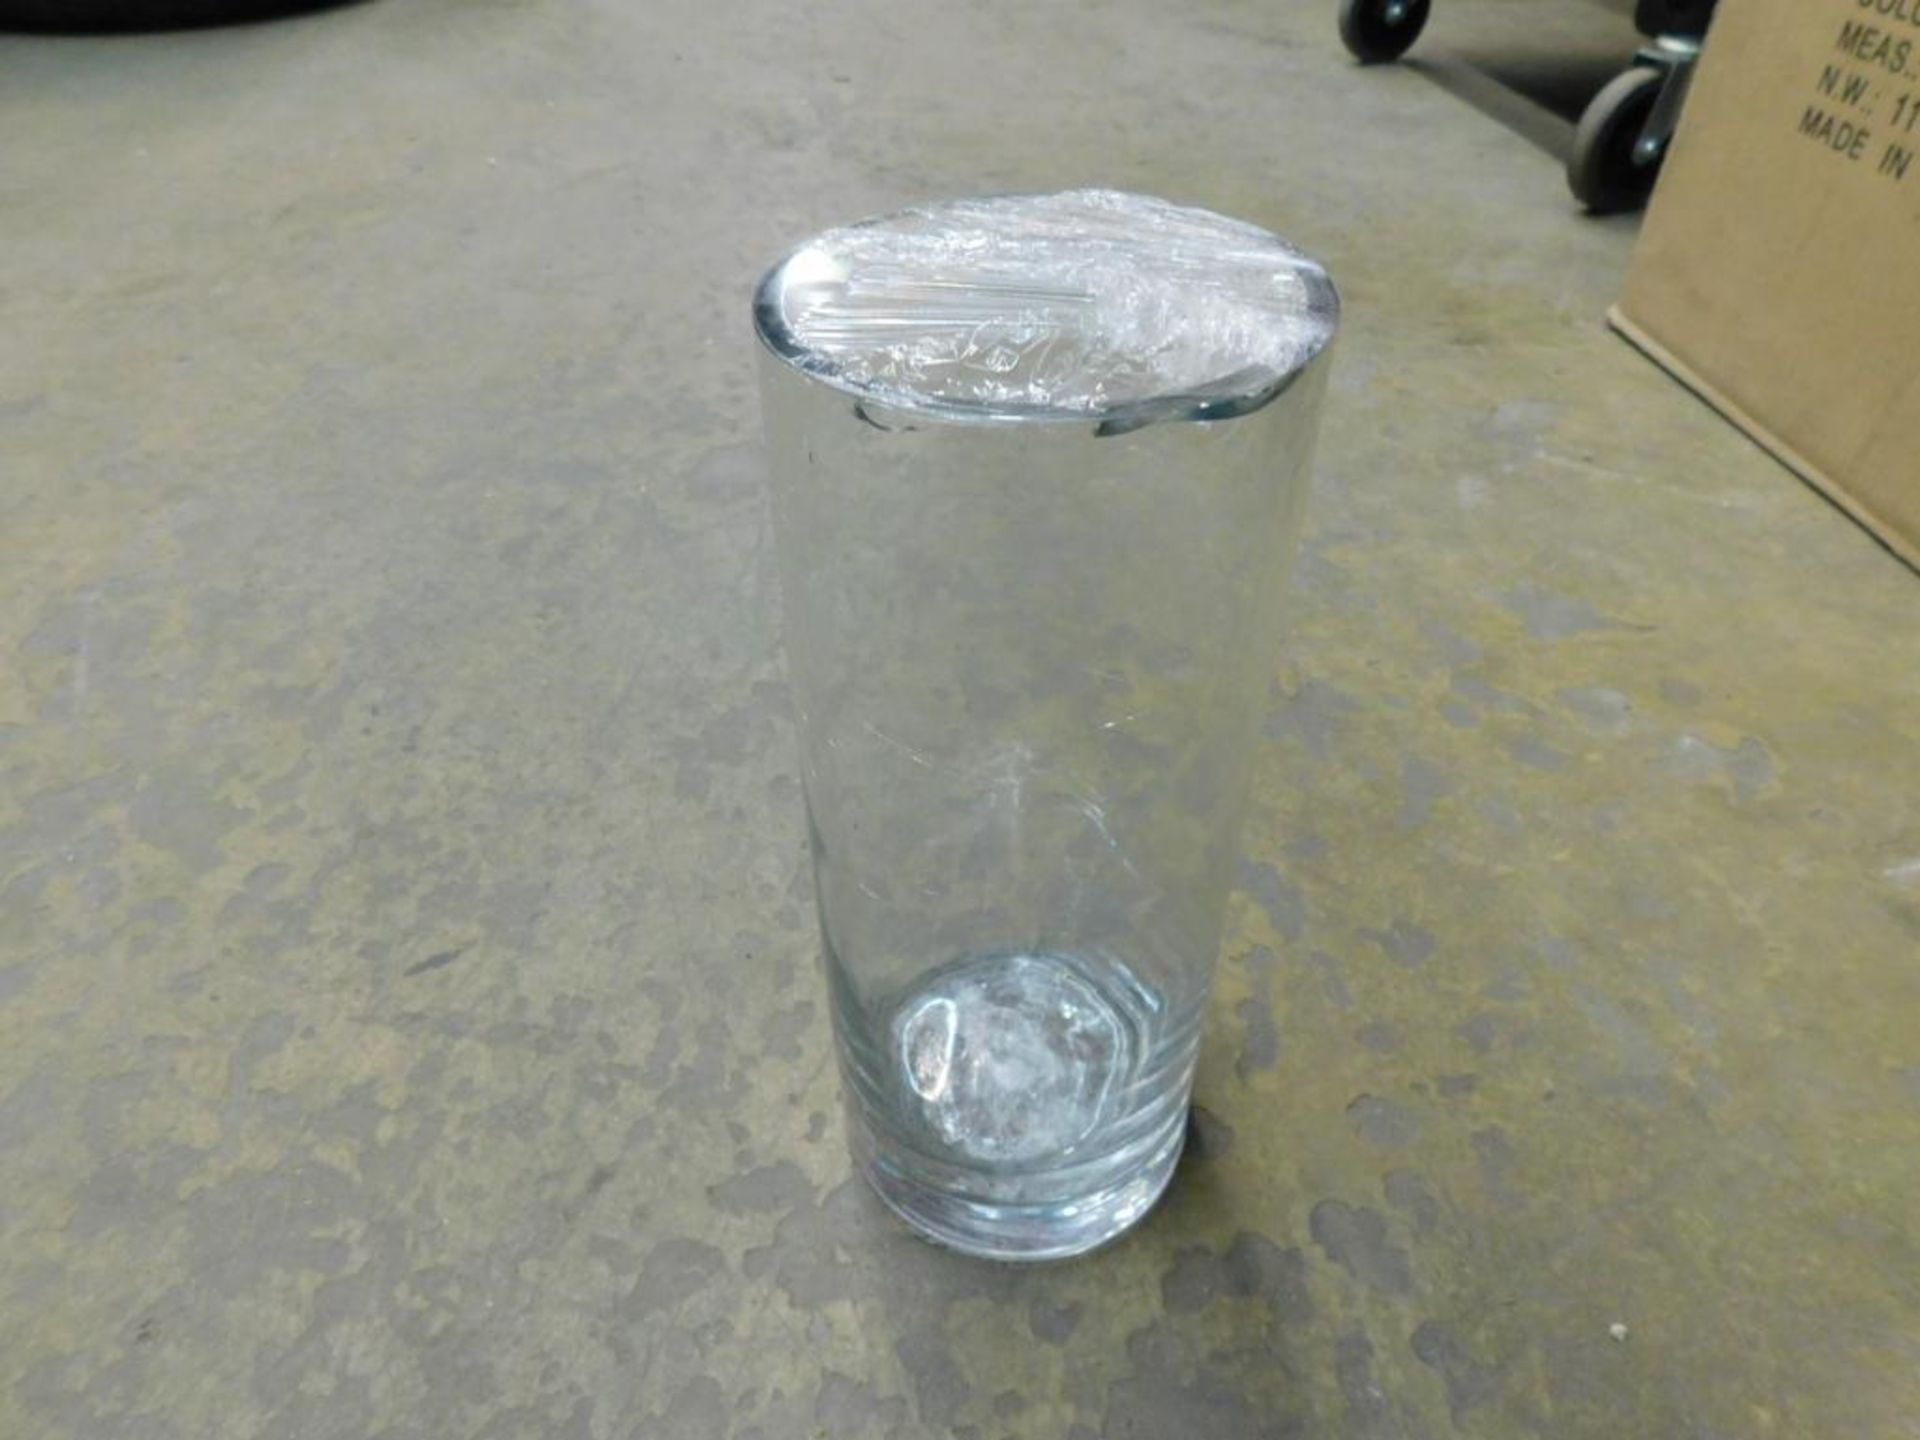 LOT: (2) Boxes of 4" x 10" Glass Cylinder Vases (LOCATION: 1766 Waukegan Rd., Glenview, IL 60025)